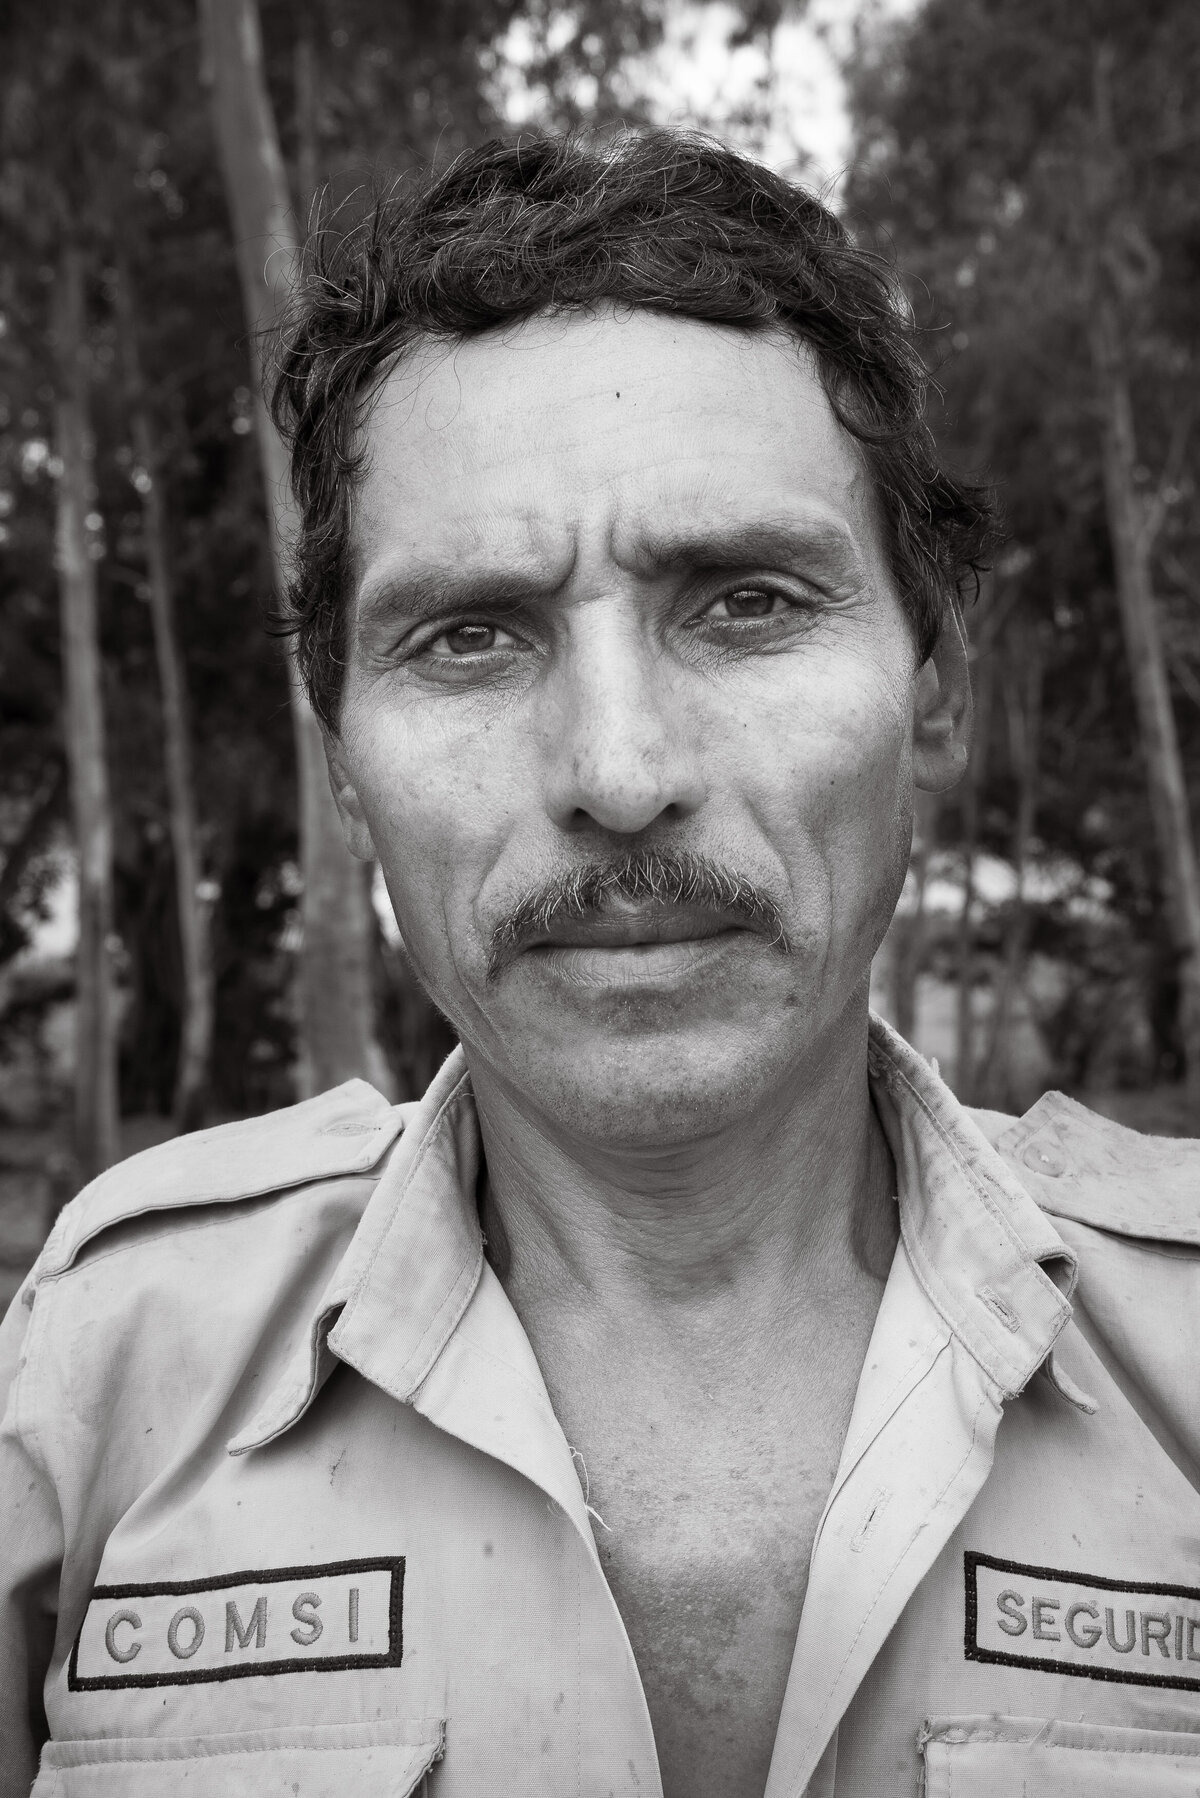 farmer looking directly at camera with strong gaze